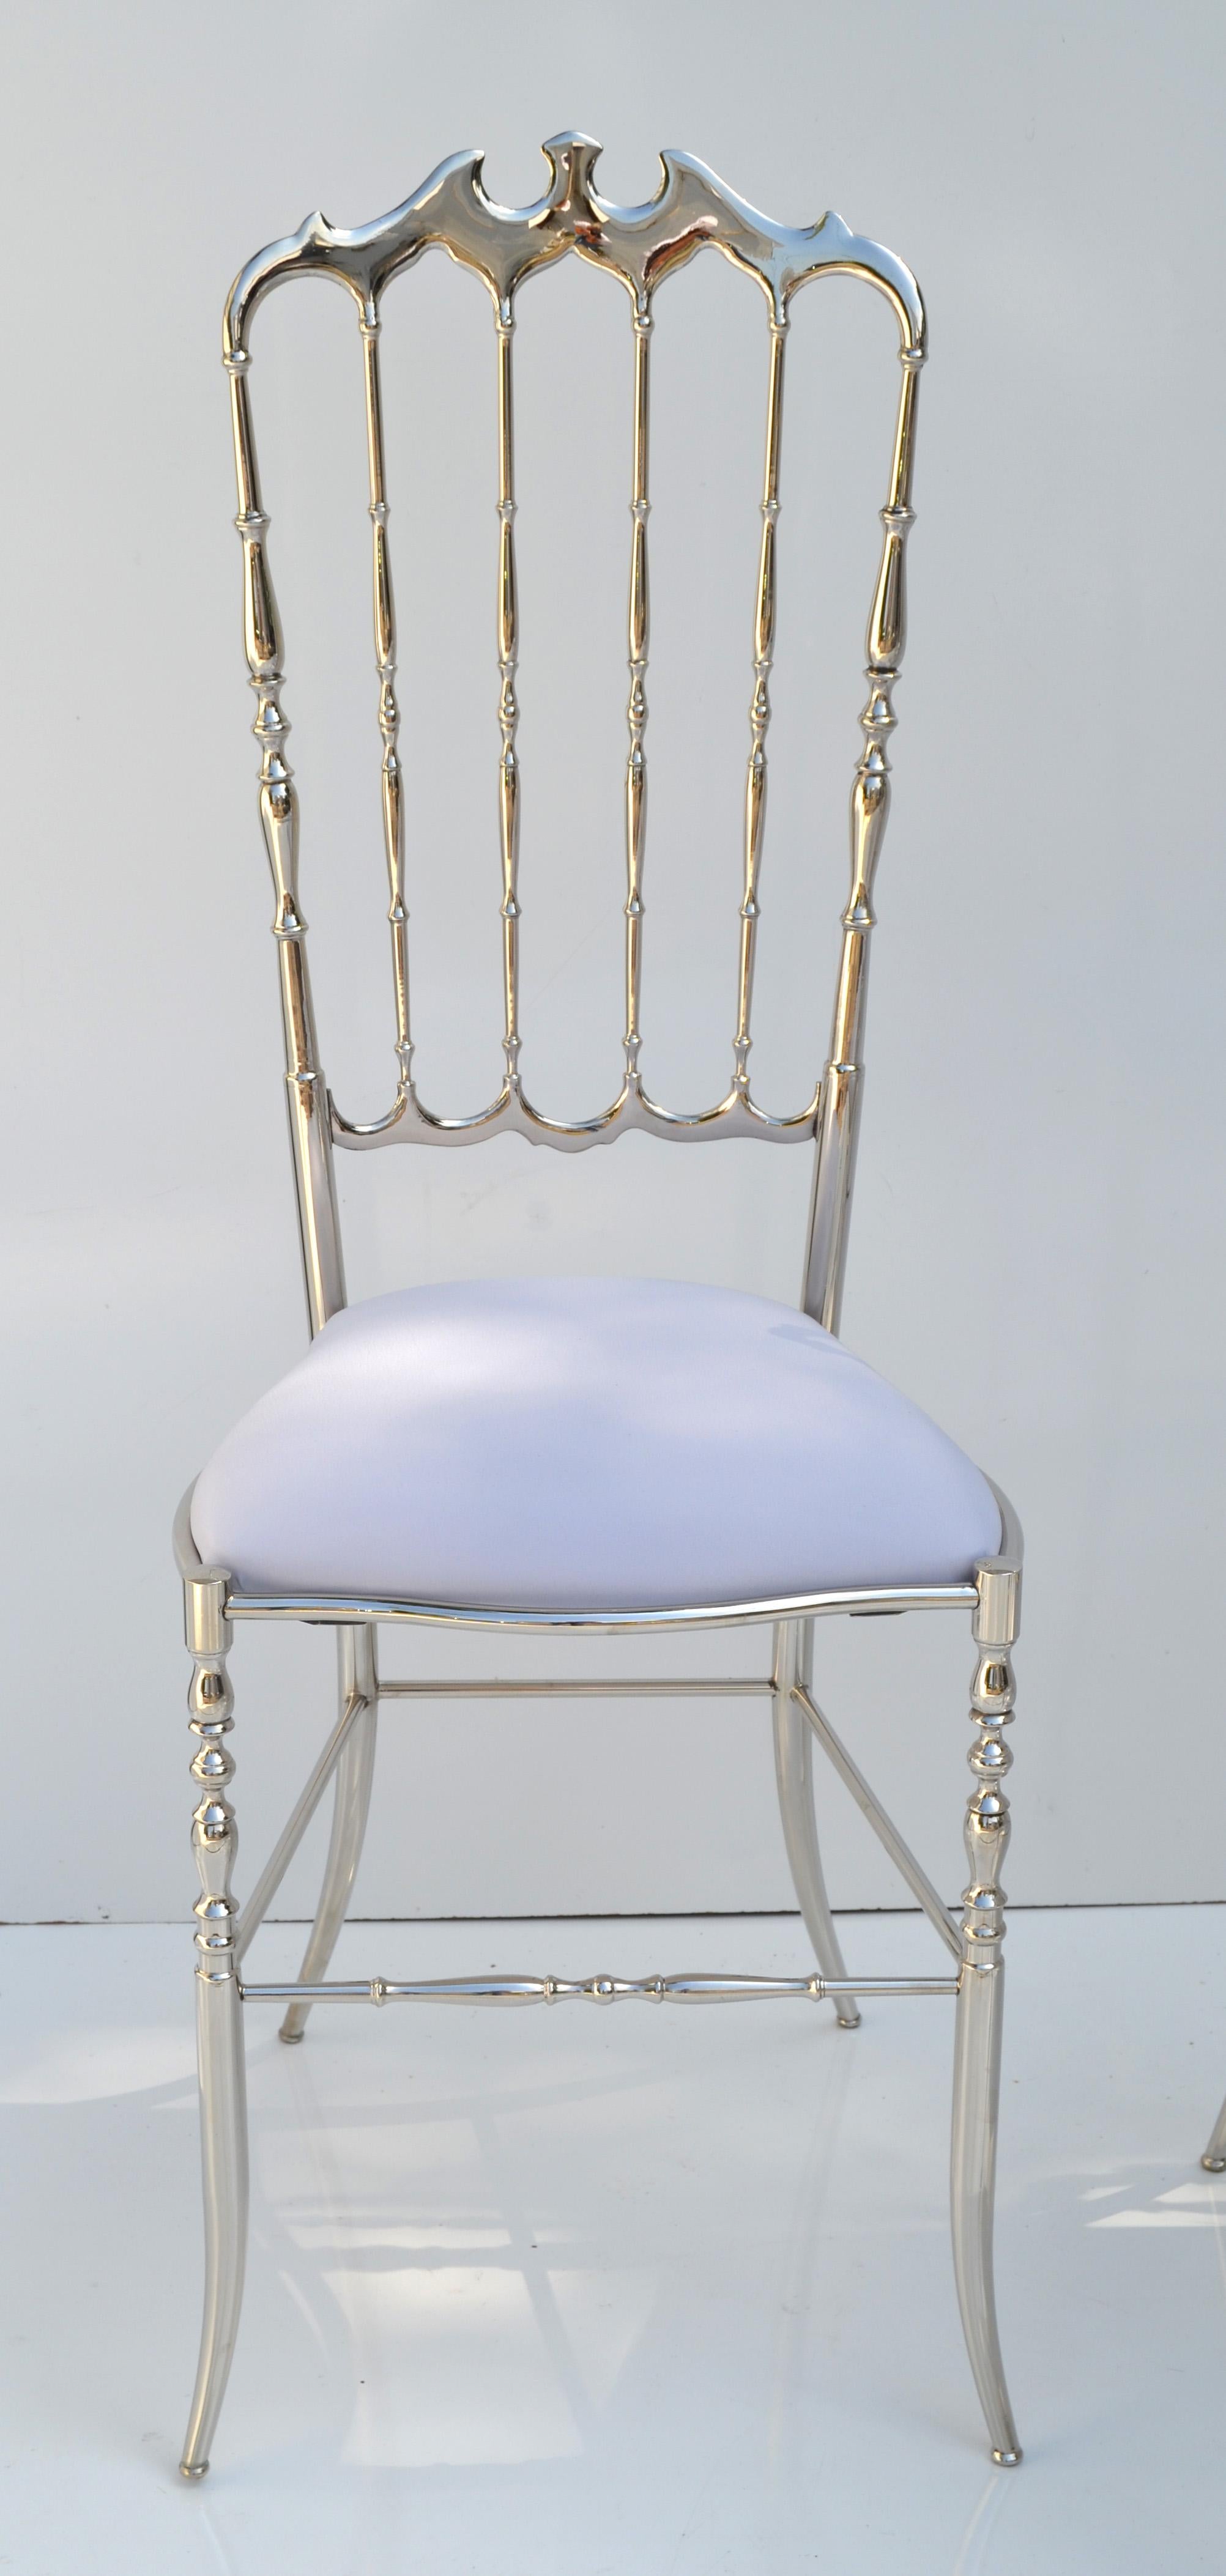 Maison Baccarat Crystal Room Restaurant Style Set of 6 Nickel Plated Chair 3